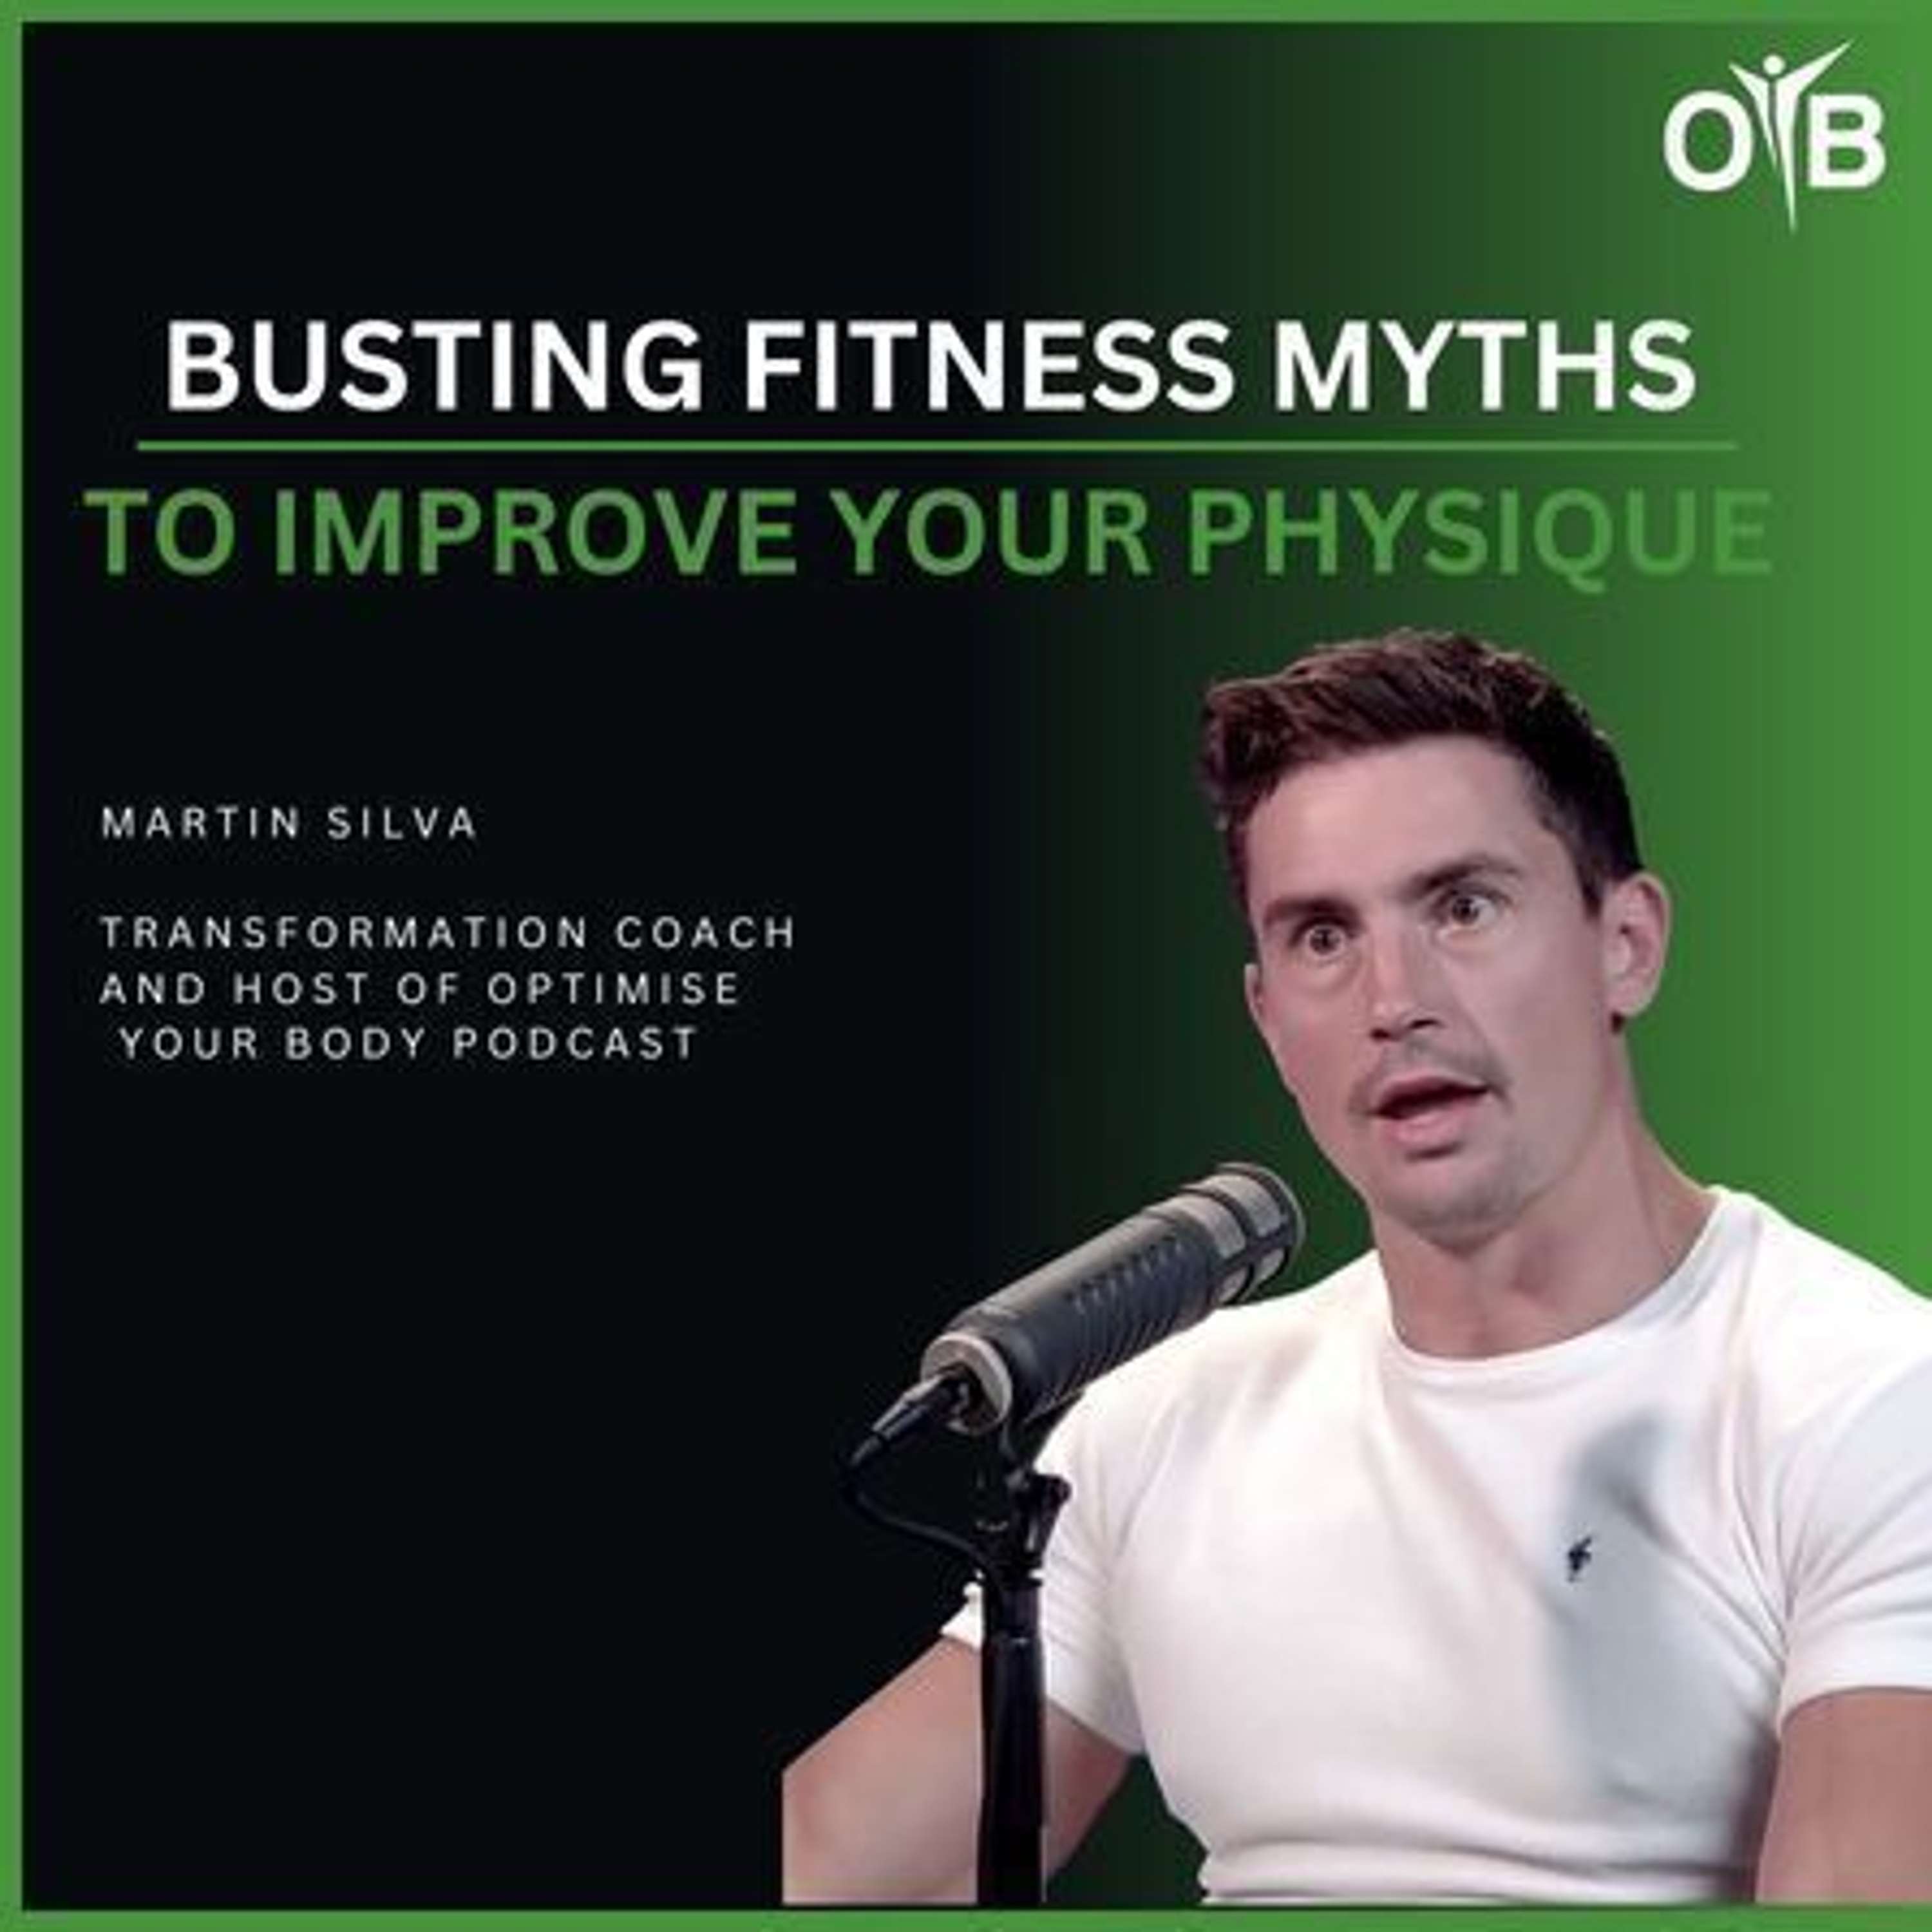 Busting Fitness Myths to Improve Your Physique